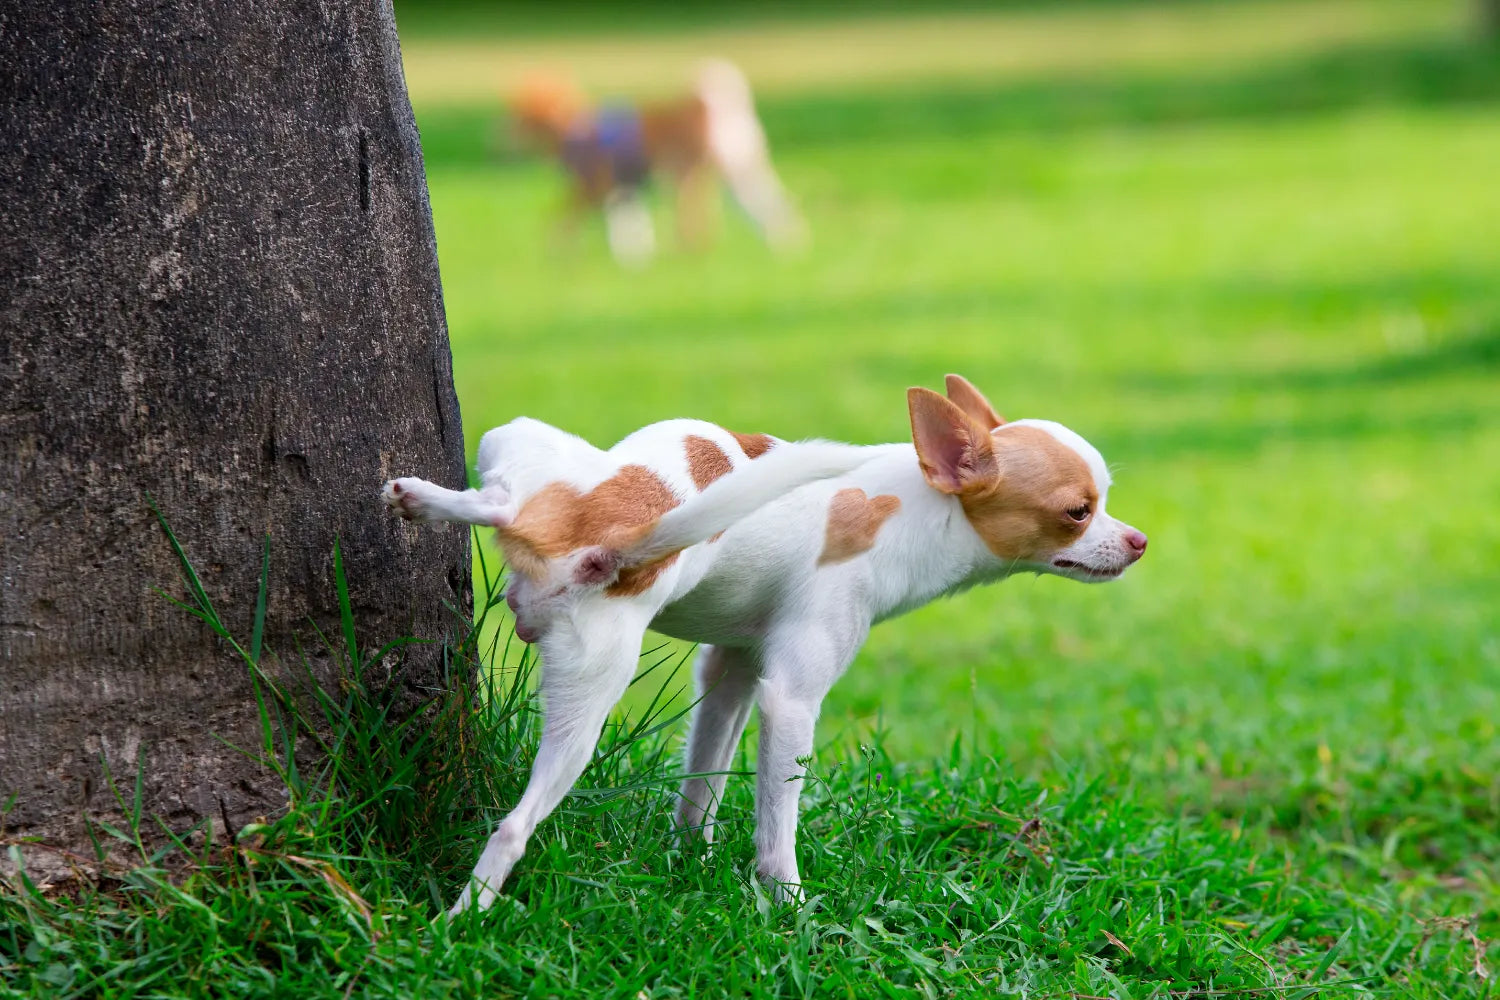 How To Train Dog To Pee in One Spot: 7 Tips